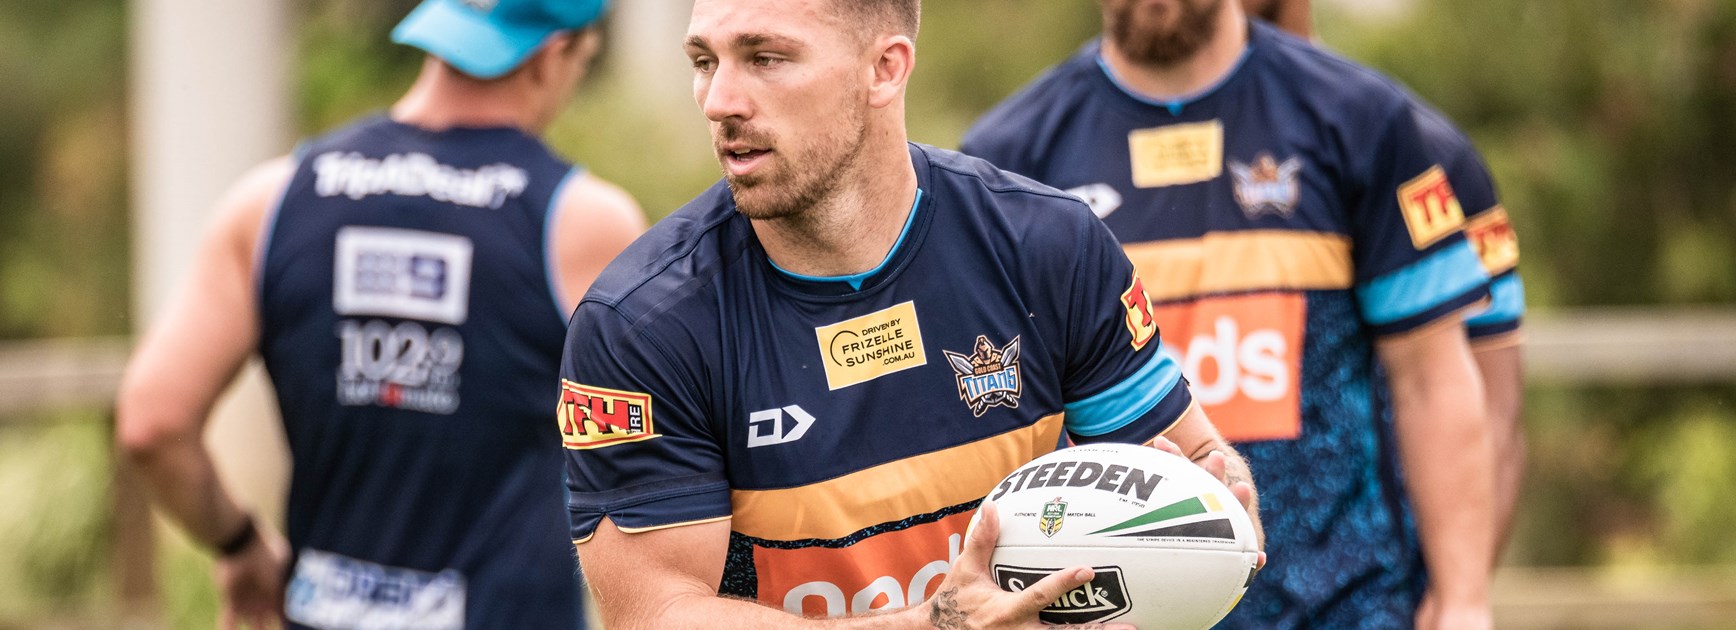 Titans back-rower Bryce Cartwright.